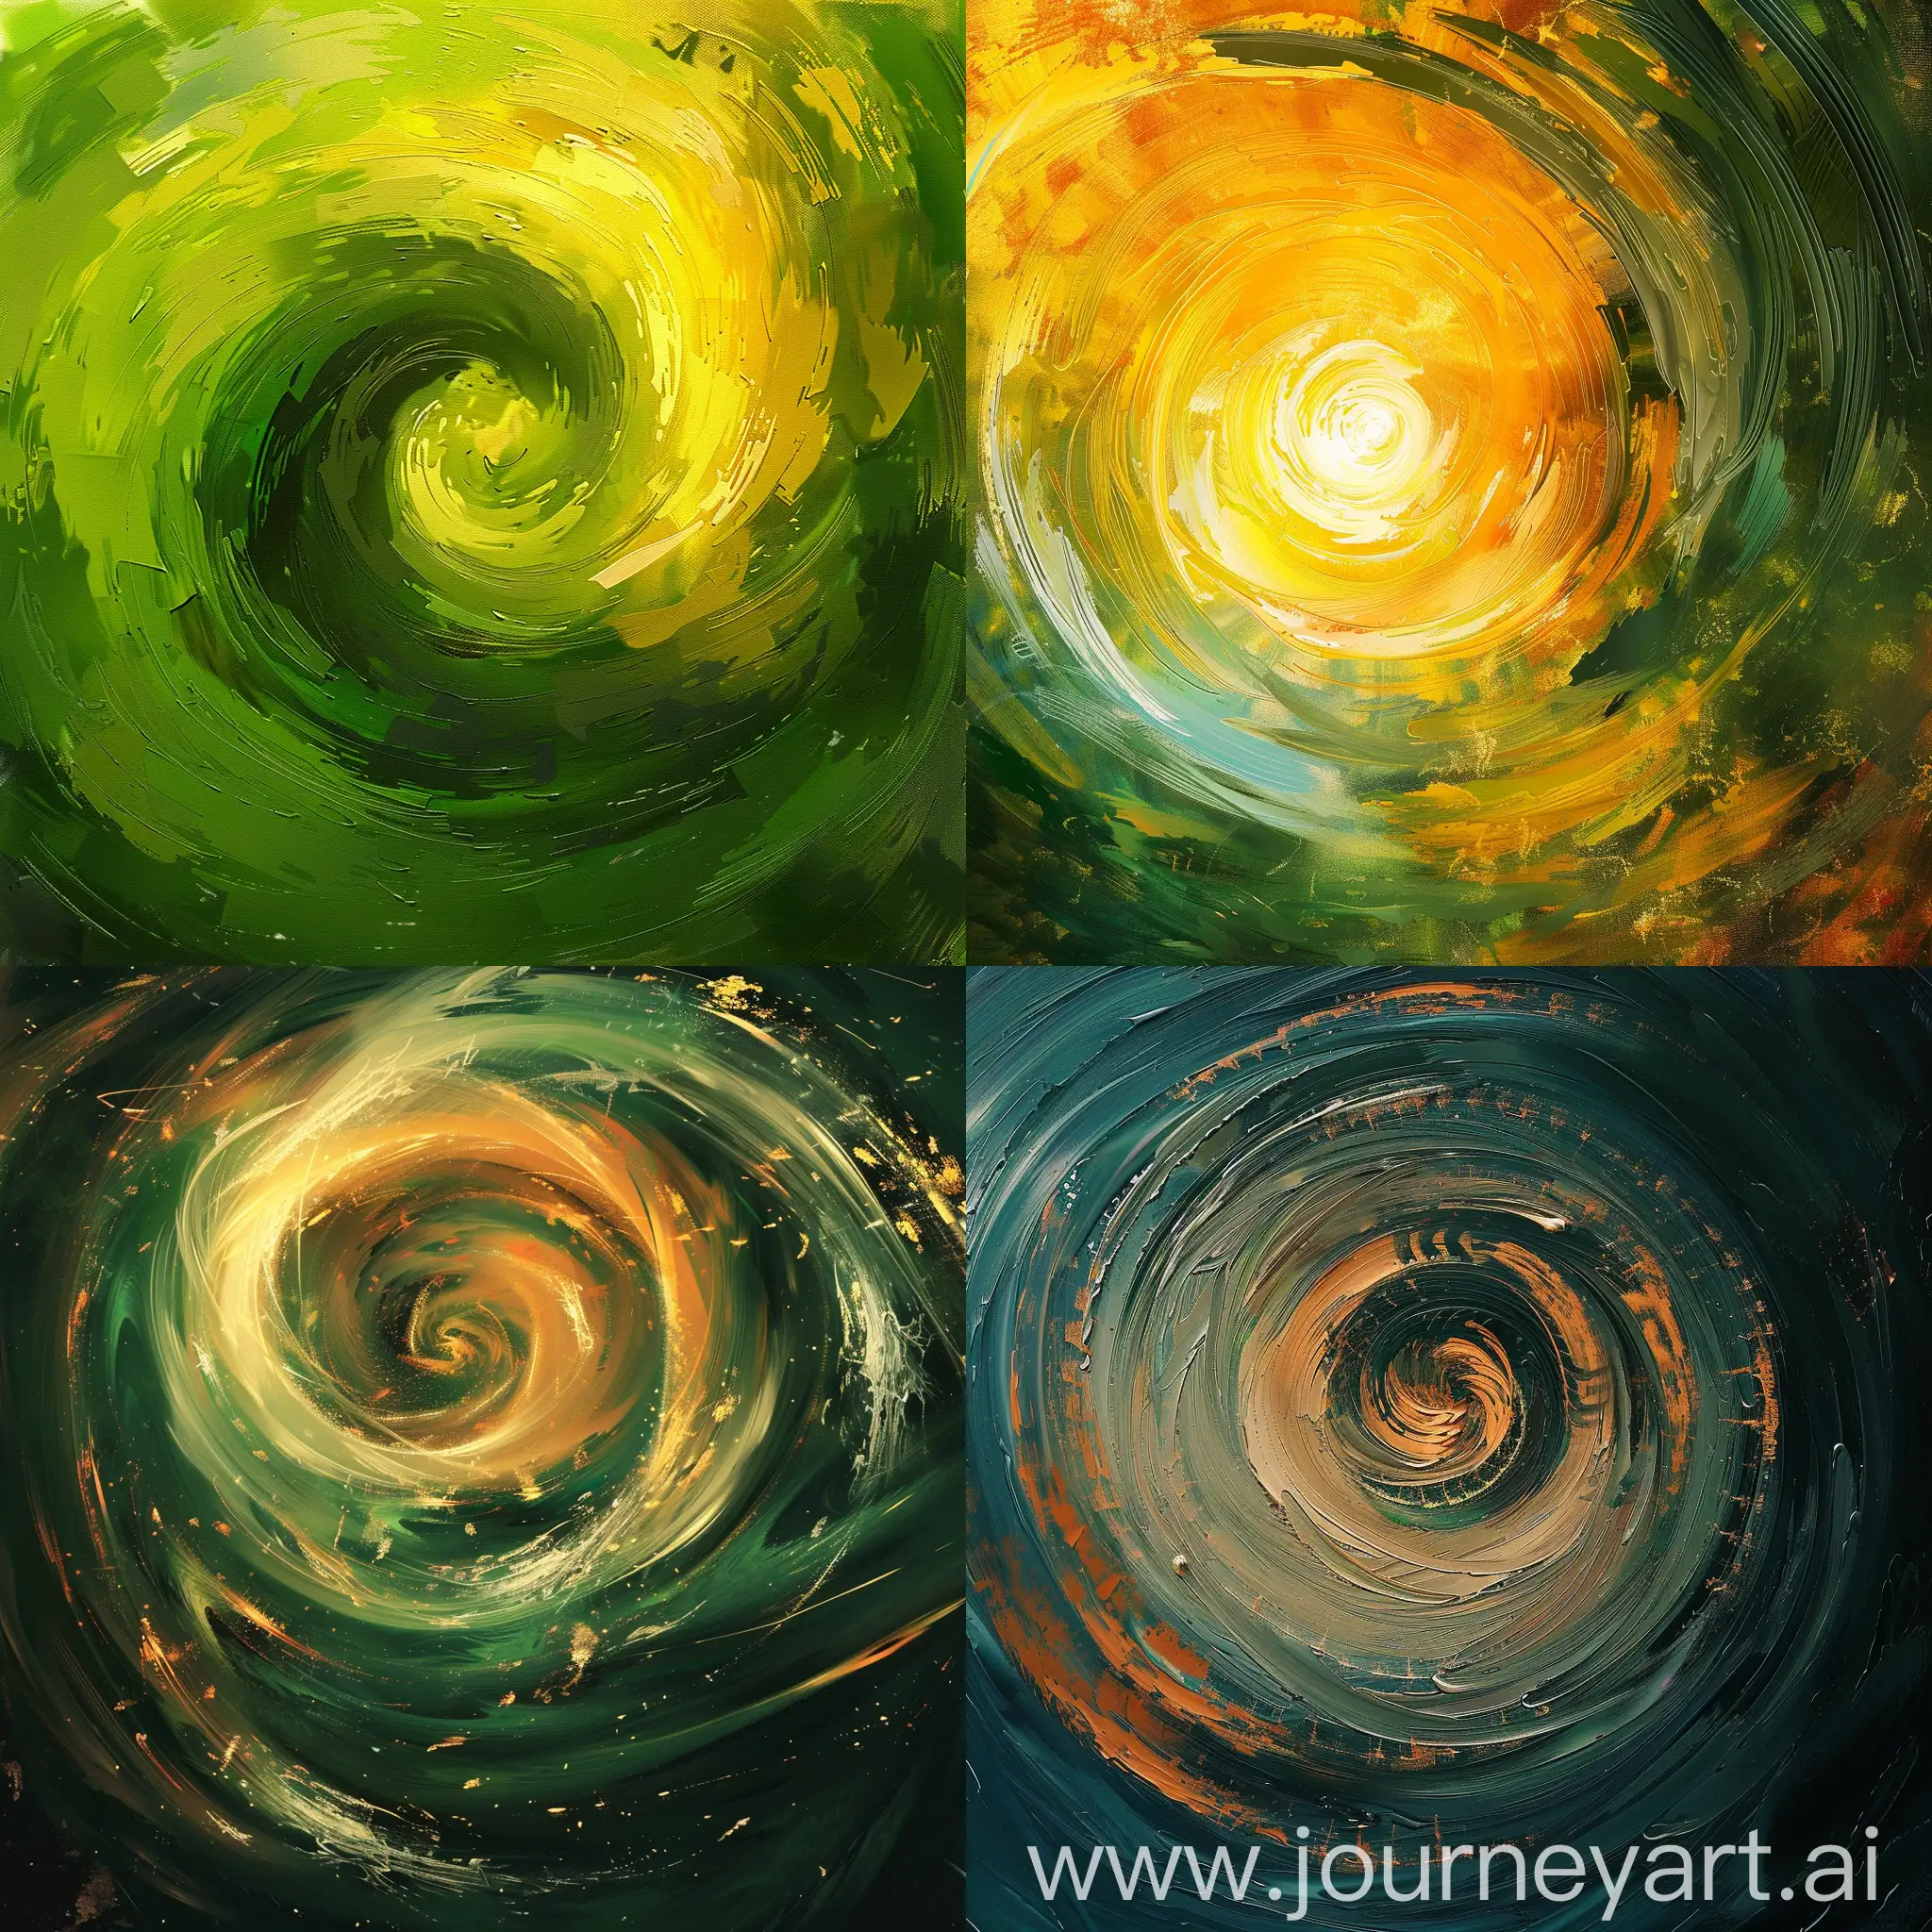 Abstract-Art-Spiraling-Nature-Brush-Strokes-in-HighQuality-Light